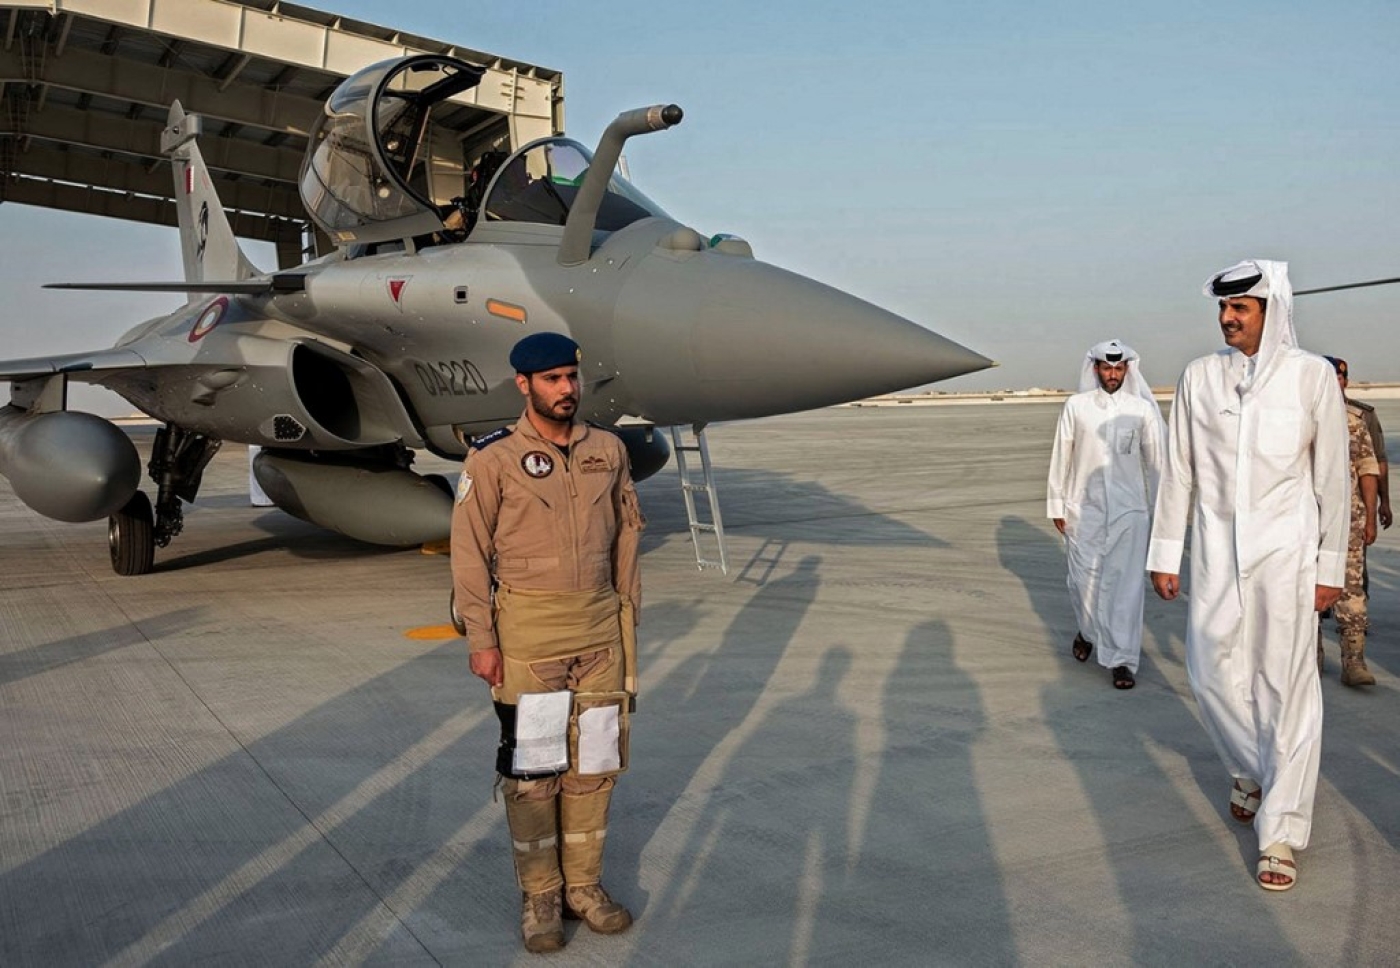 Qatar to train air force in Turkey under new deal | Middle East Eye